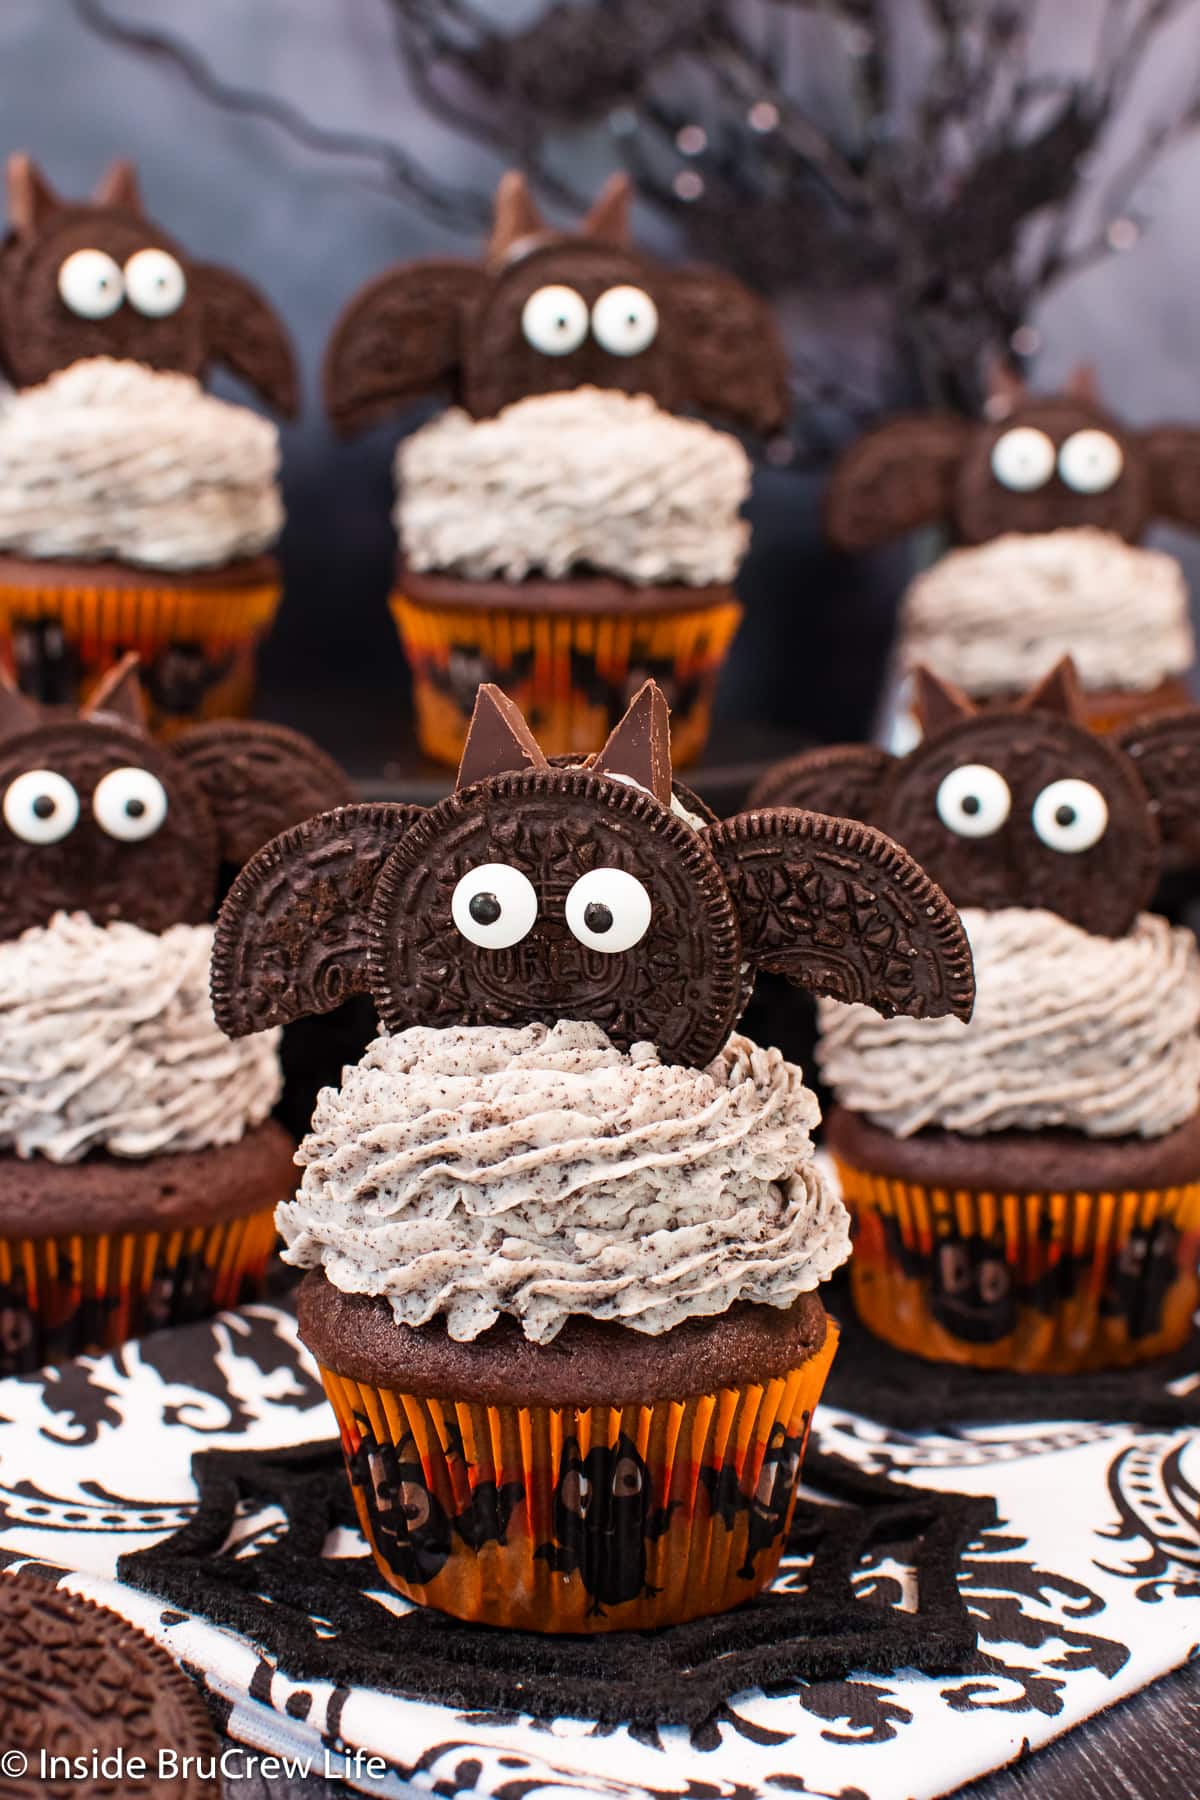 Cupcakes topped with cookie bats.